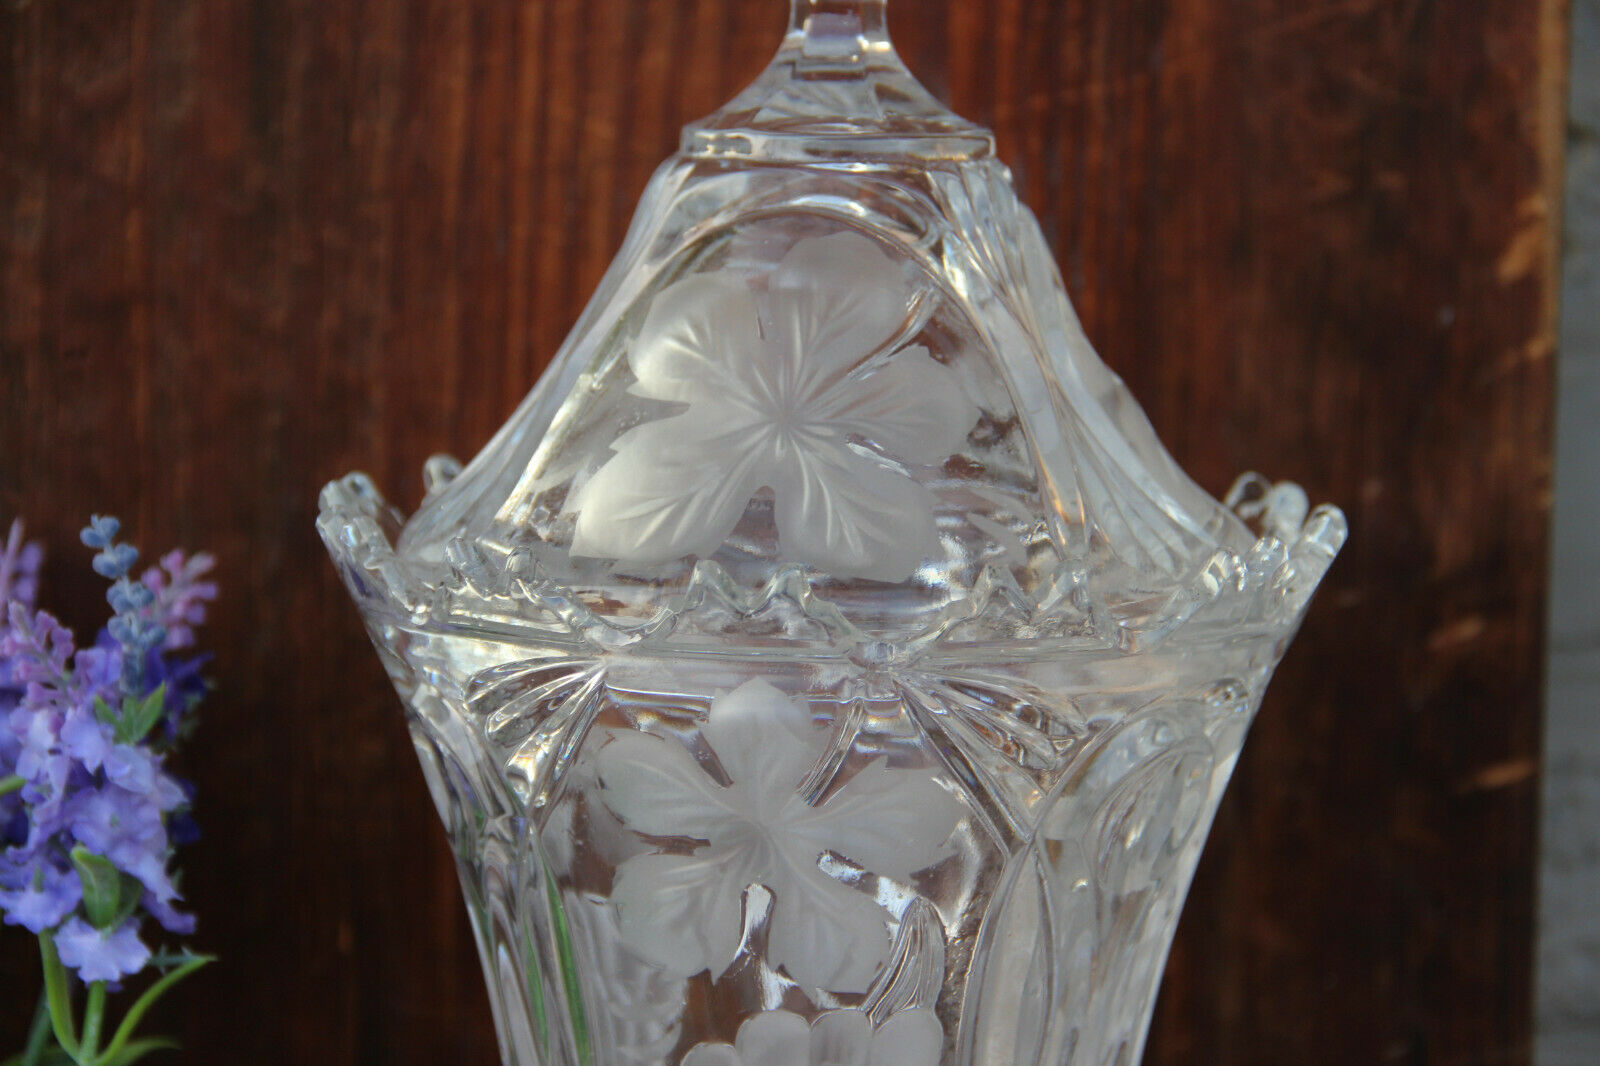 How to Care for Heirloom Crystal and Glass